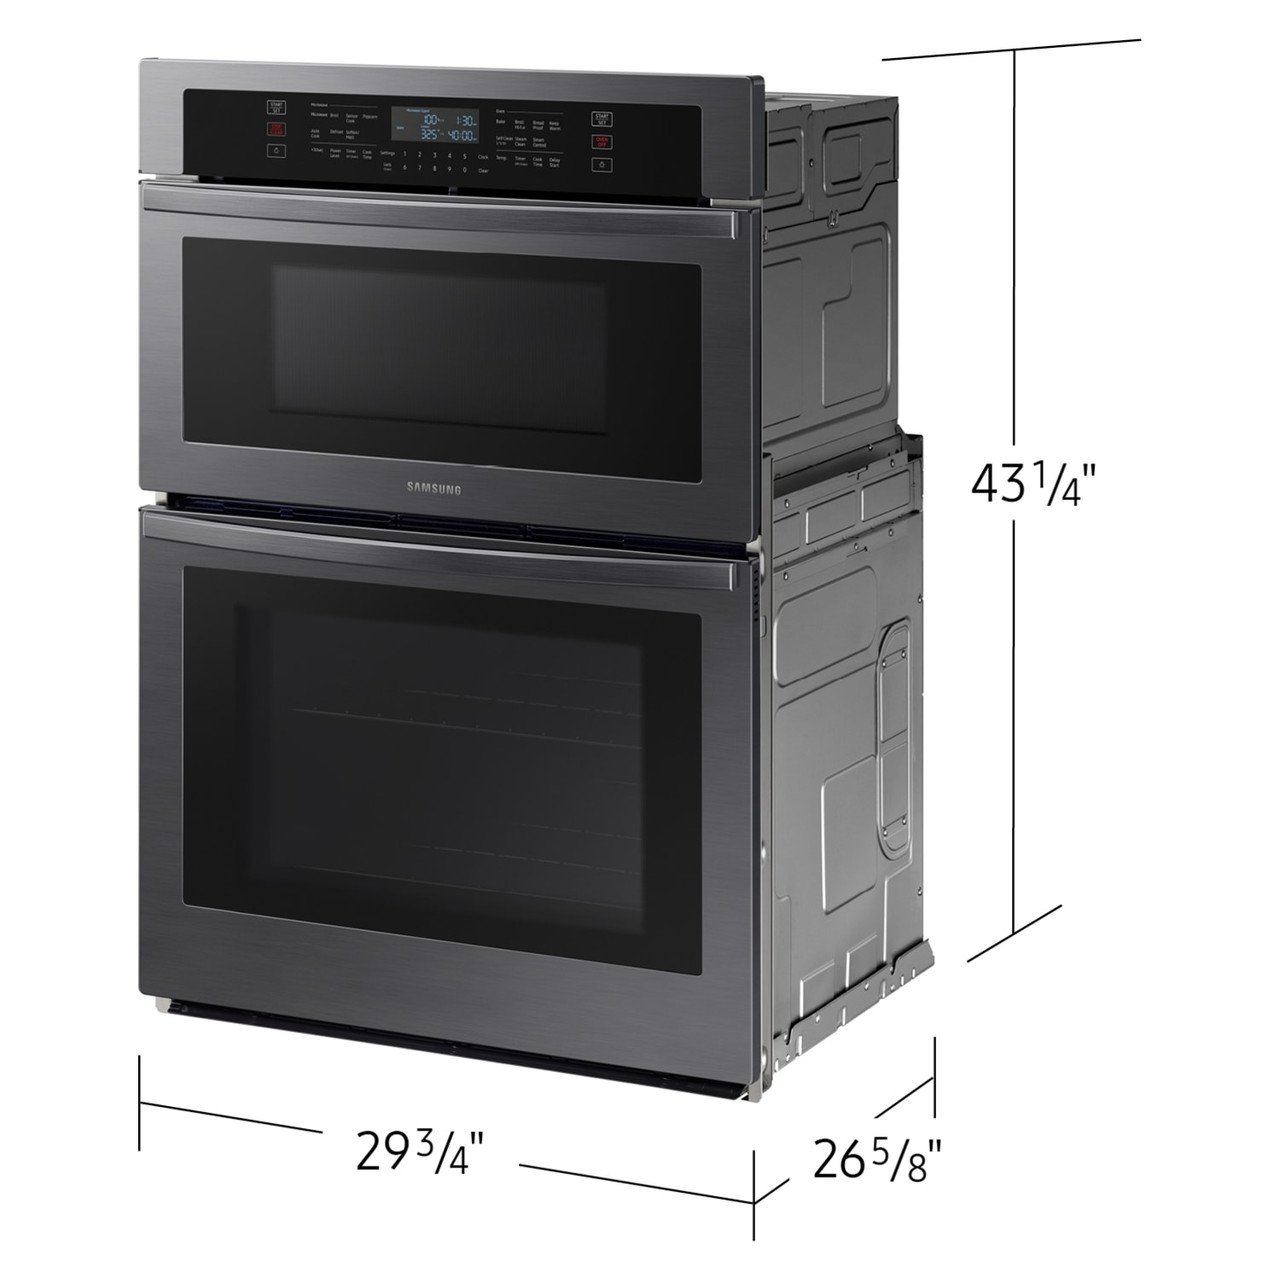 Samsung 30” Microwave/Oven Combination, Self-Clean/Steam Clean, Glass Touch Controls in Black Stainless Steel